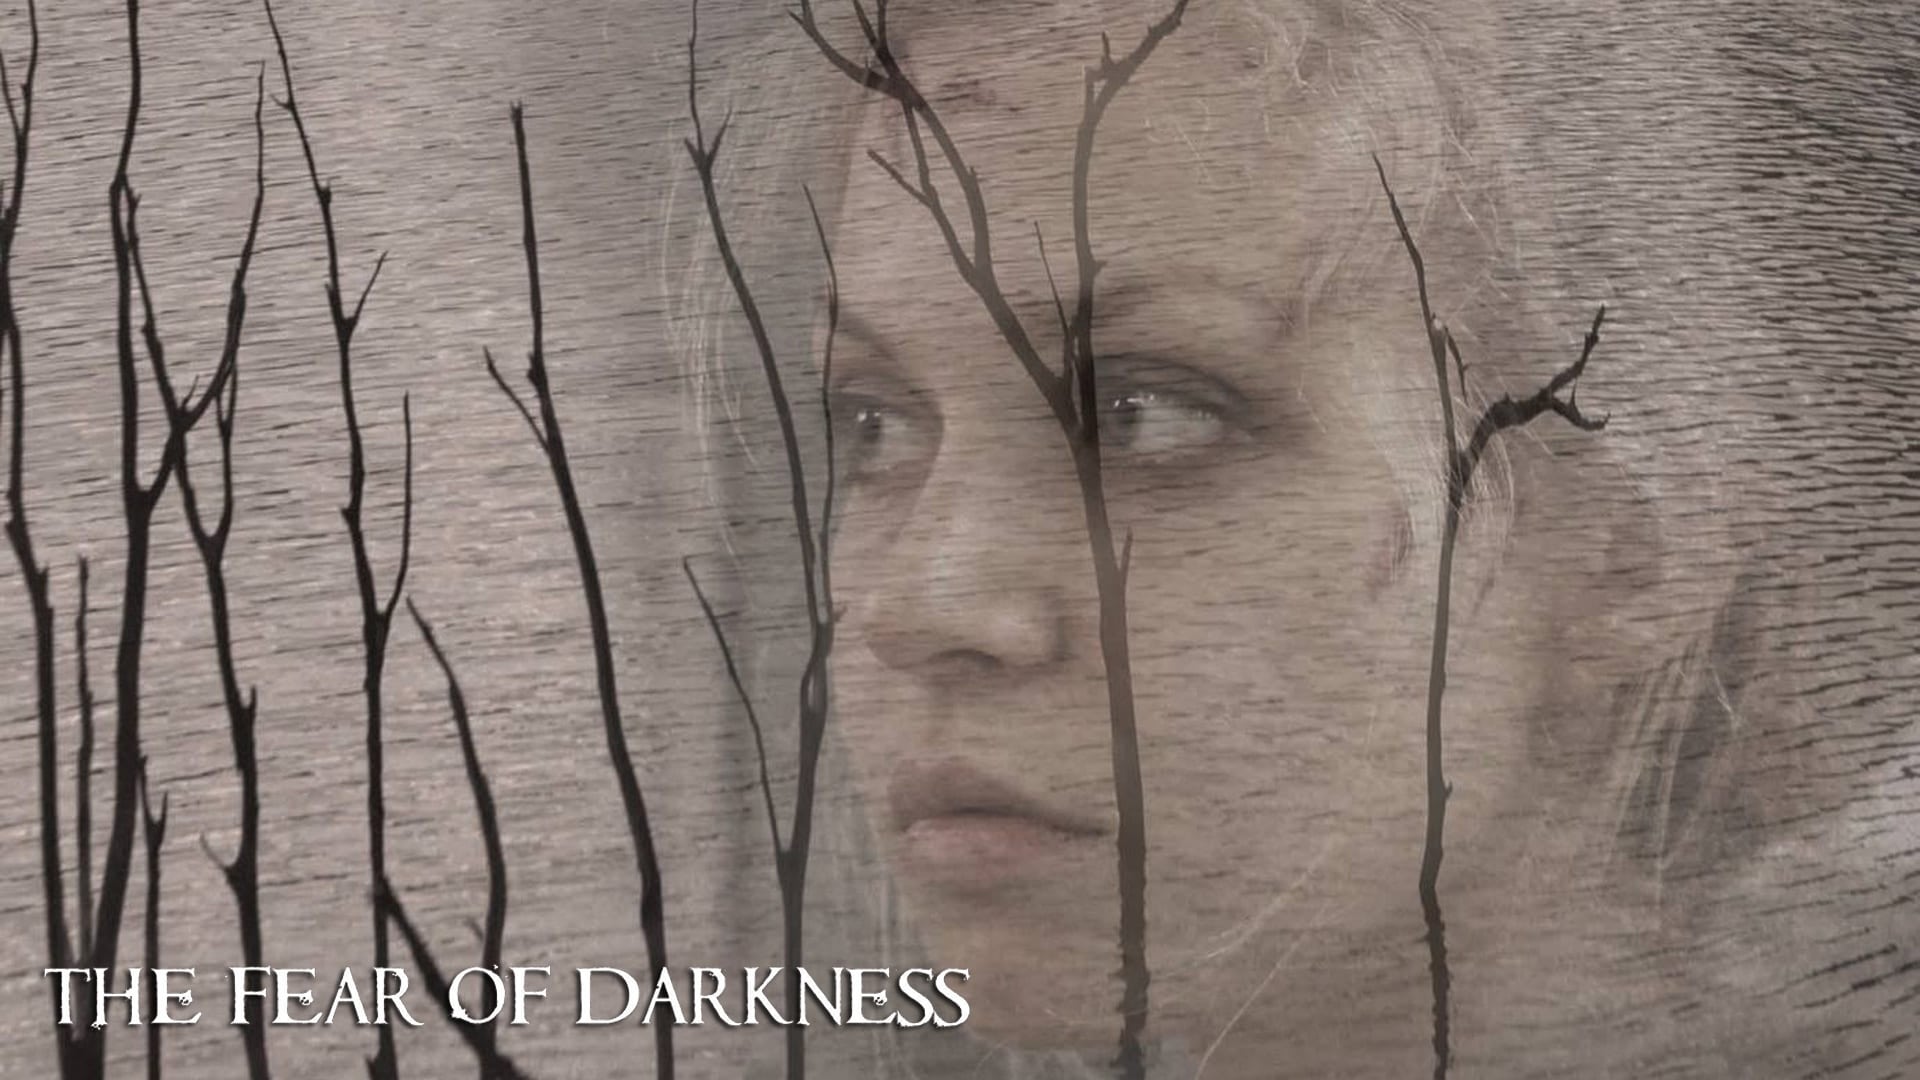 The Fear of Darkness